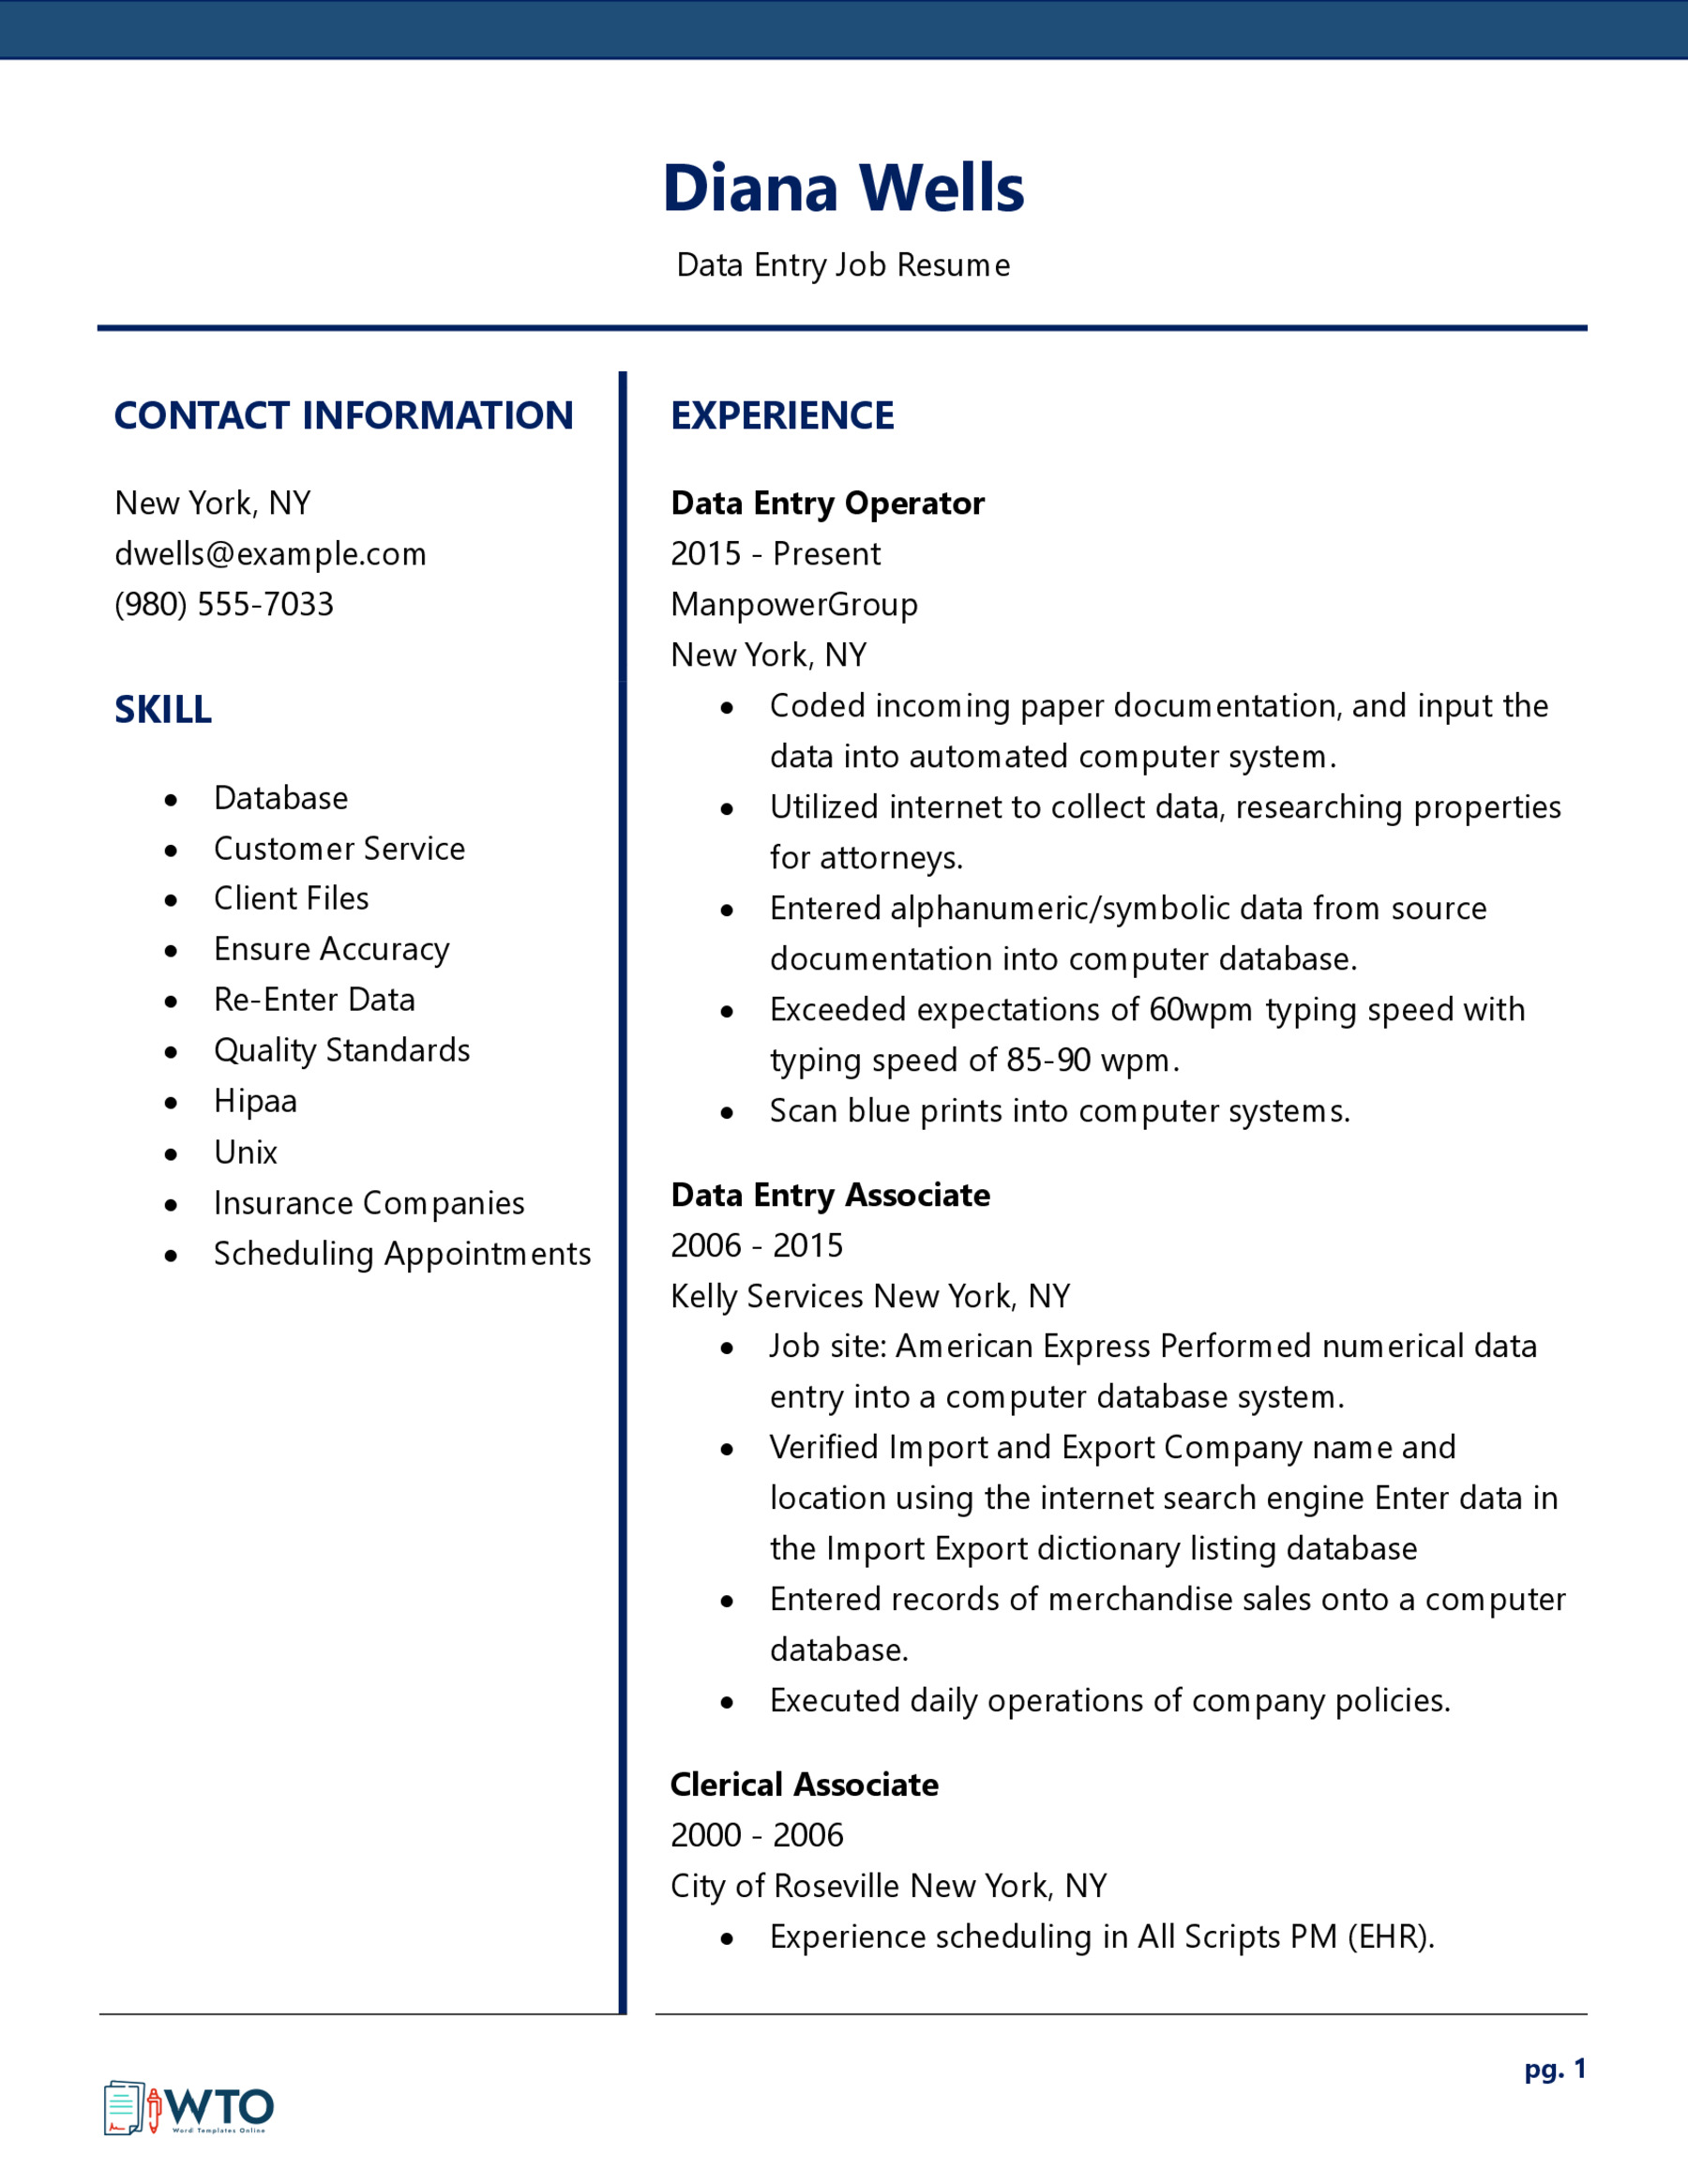 Downloadable Data Entry Job Resume Template - Word Format